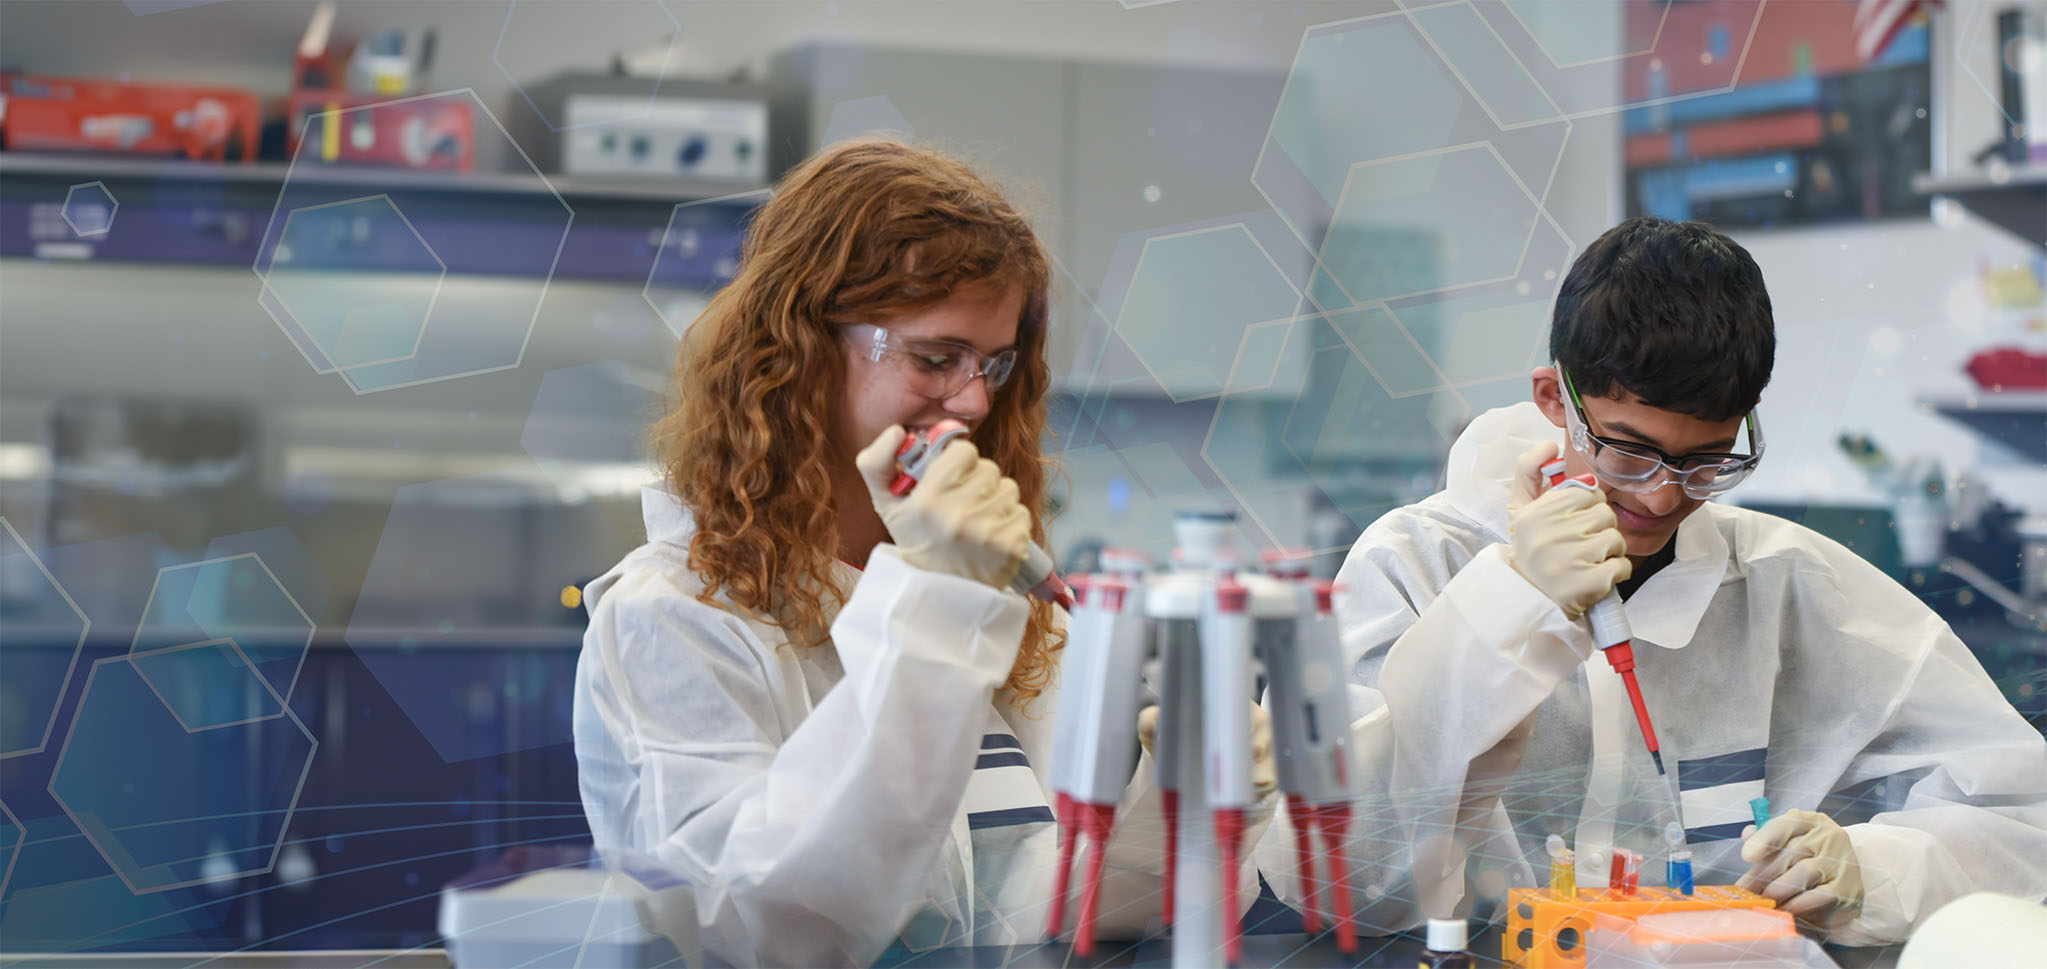 a male and female student work on pipetting in Bioscience coursework at the Innovation Center